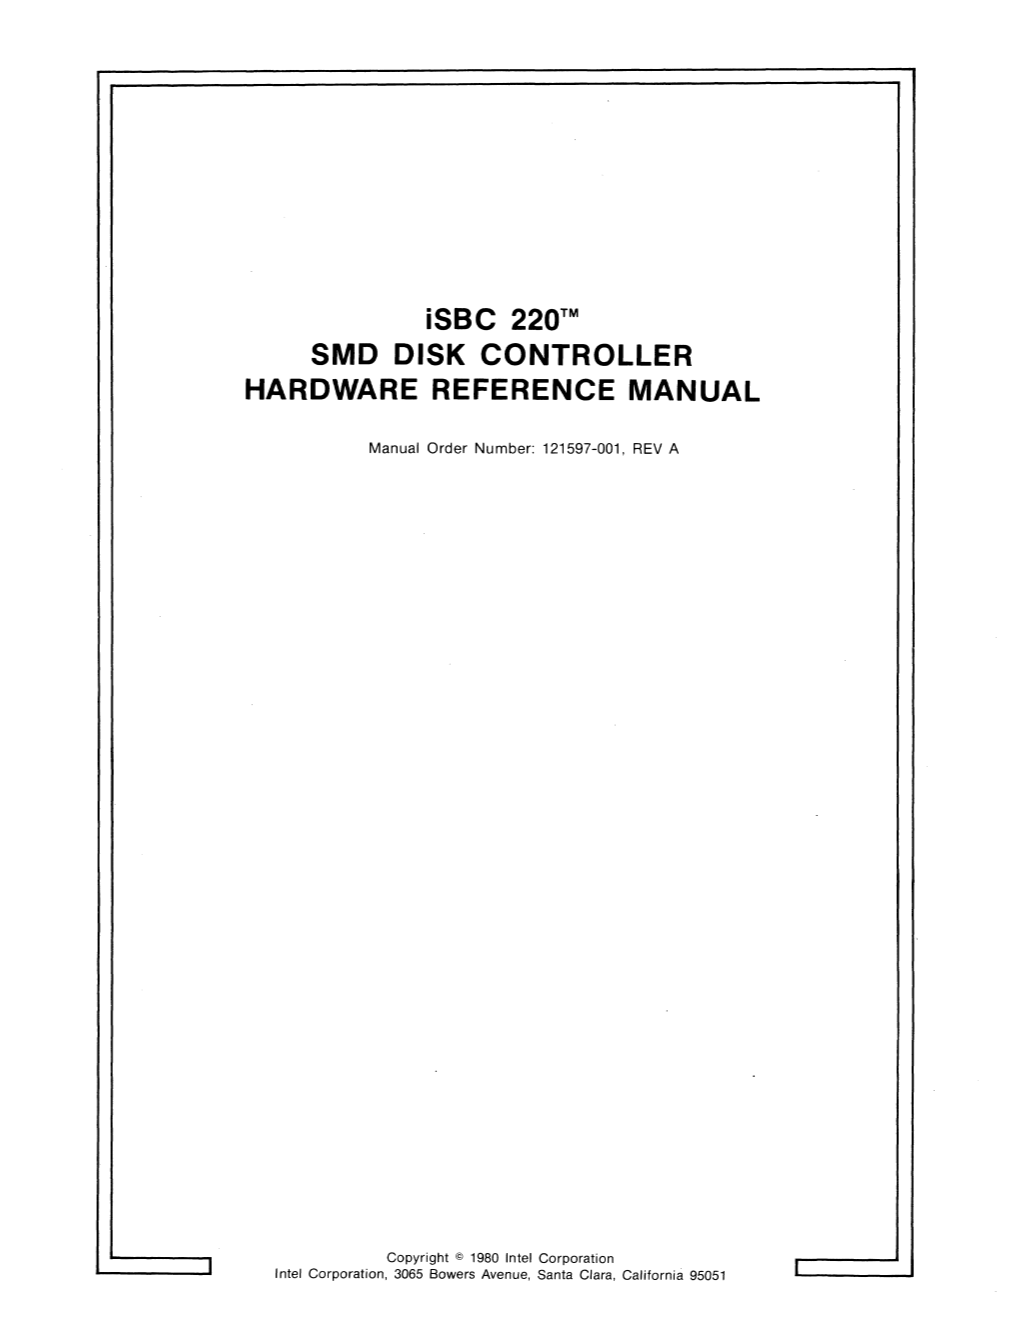 Isbc 220™ SMD DISK CONTROLLER HARDWARE REFERENCE MANUAL